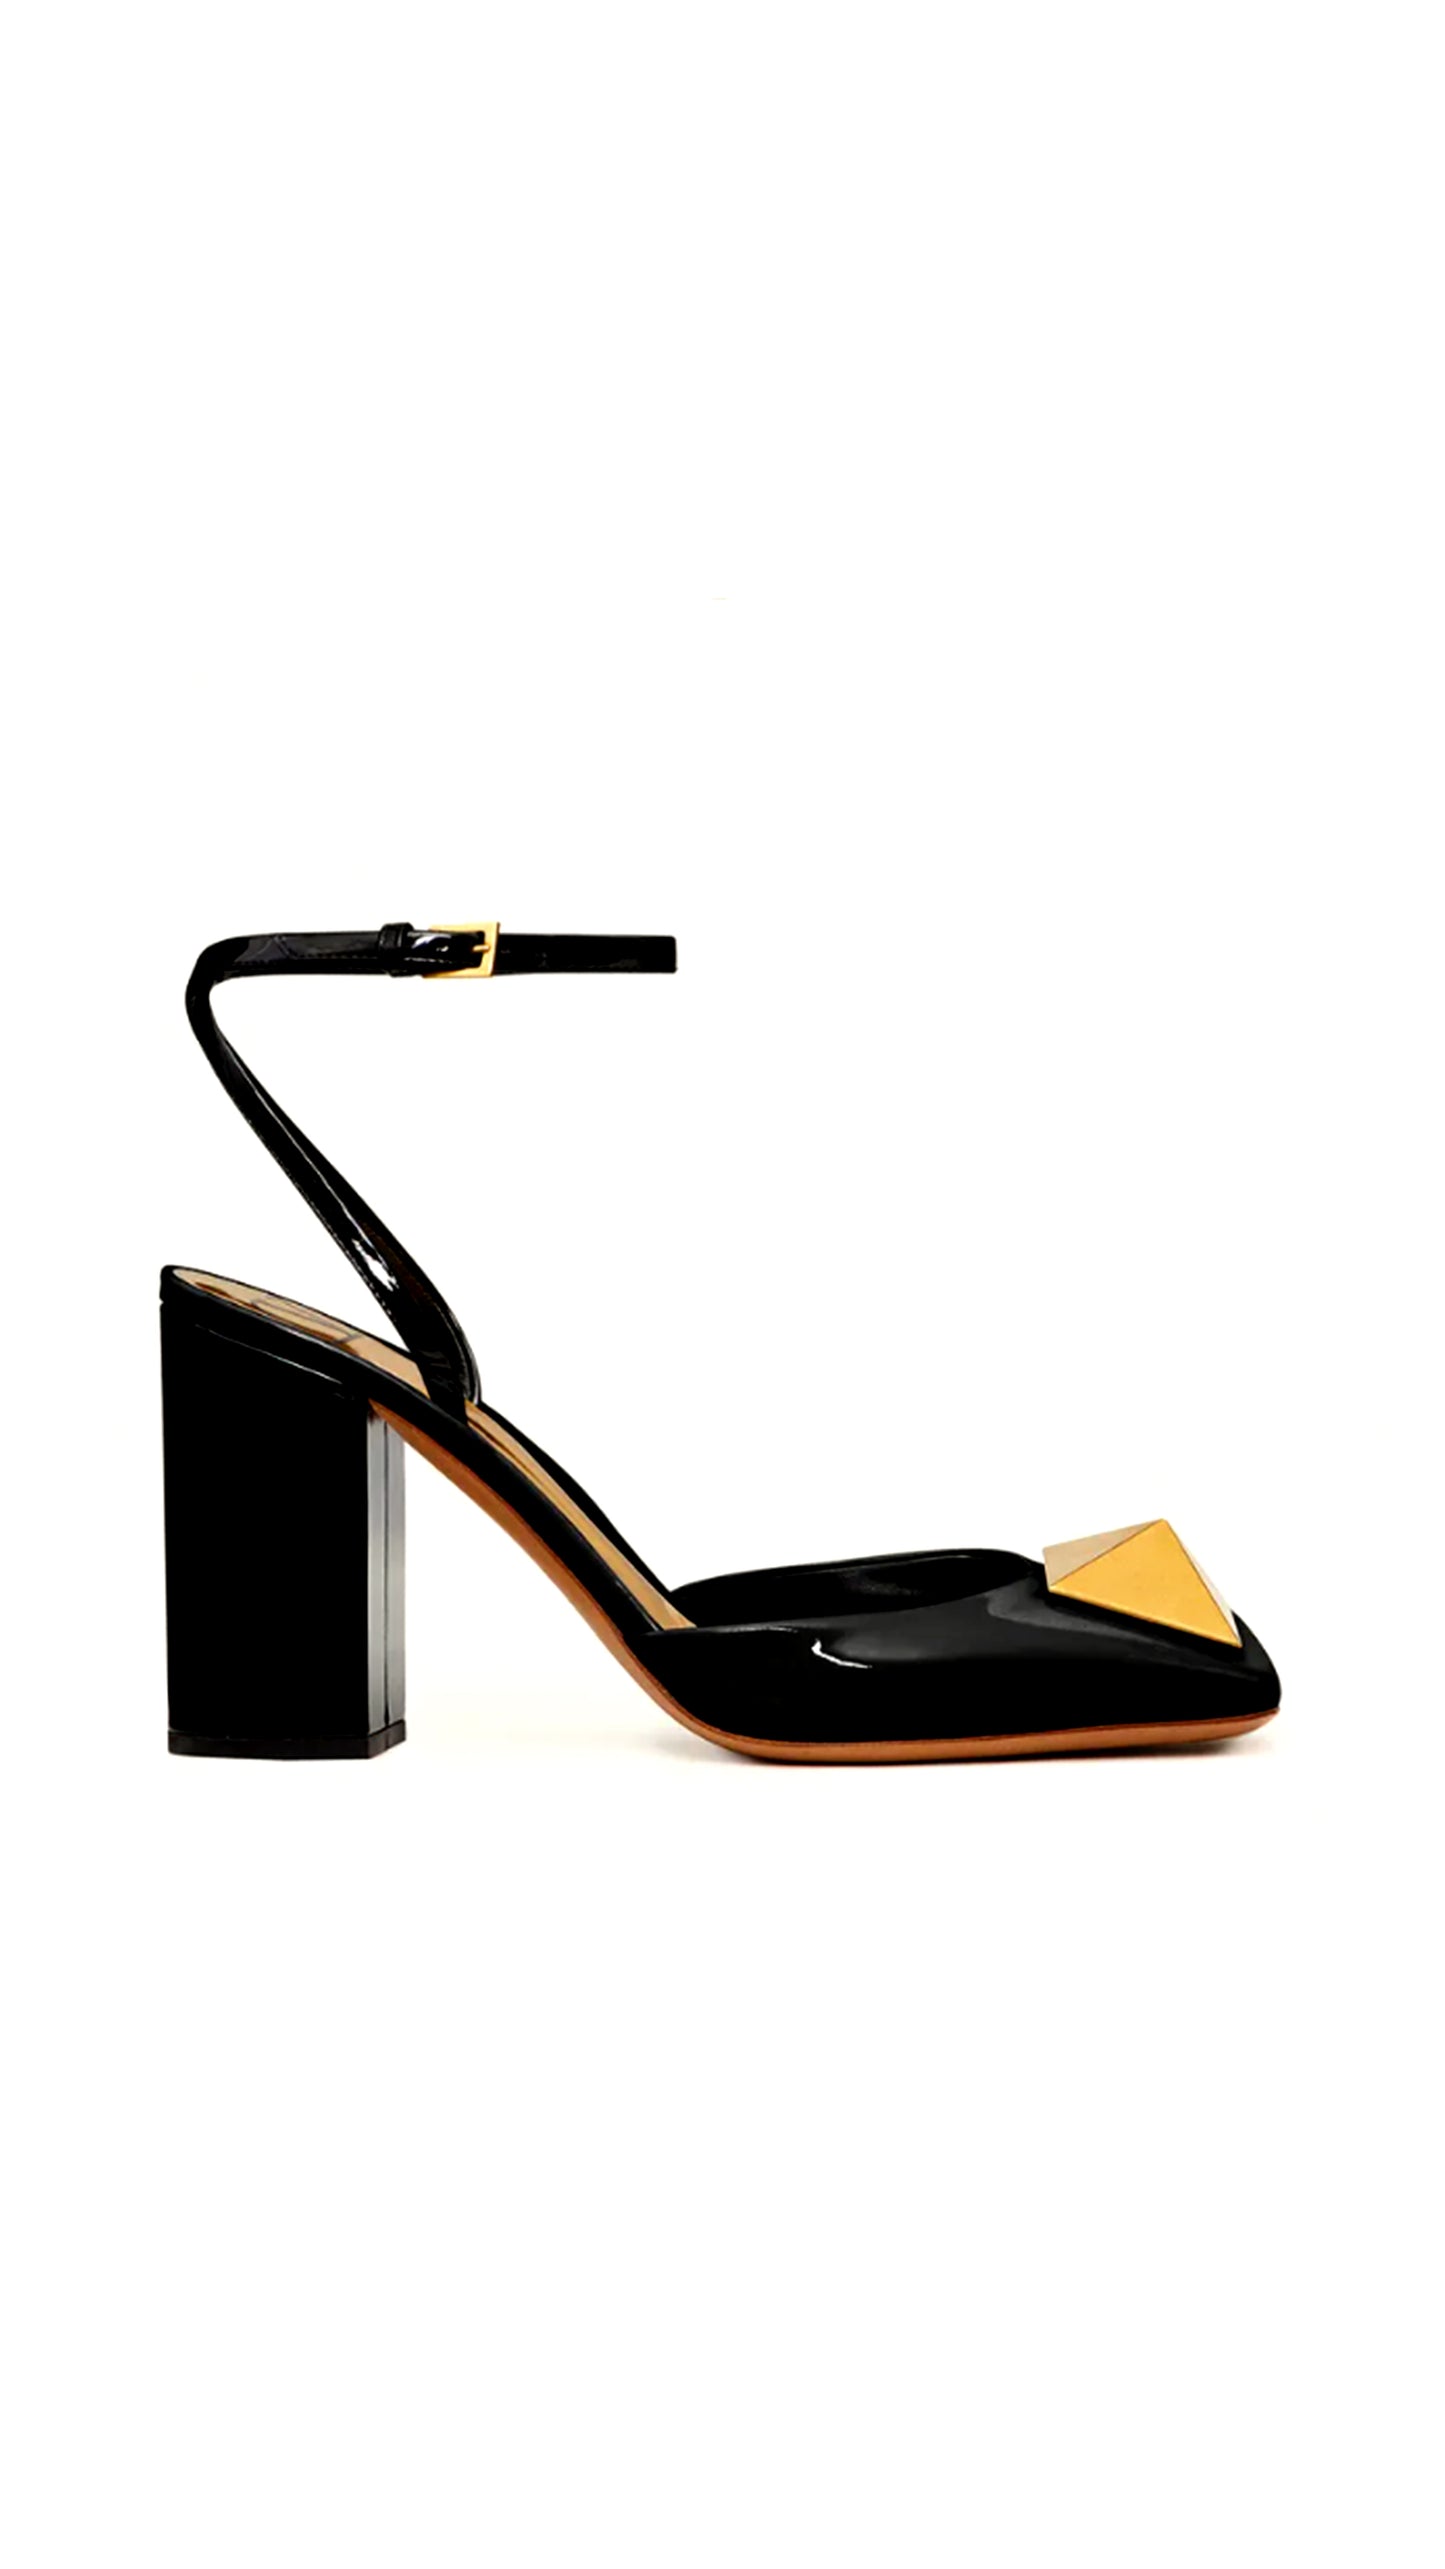 One Stud Pump in Patent Leather 90mm - Black